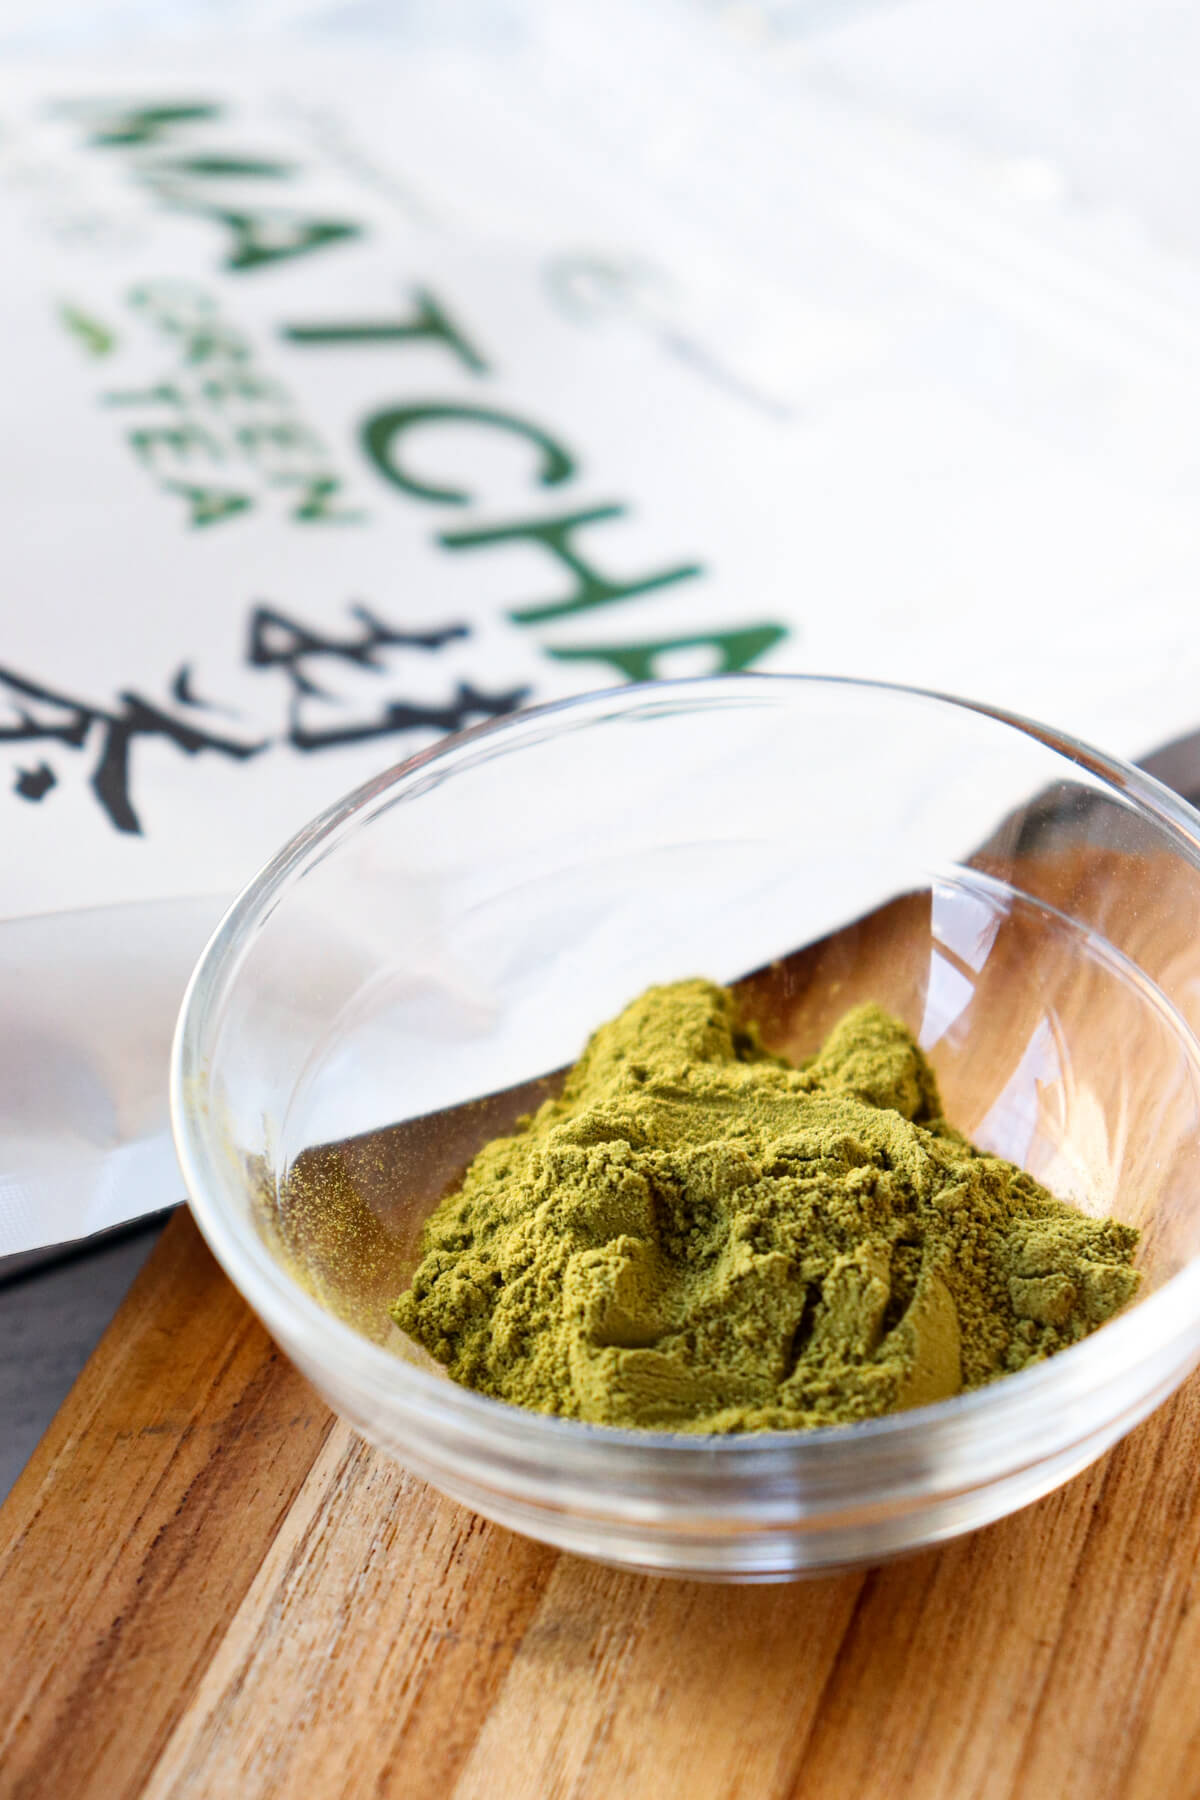 A glass bowl with matcha powder and a bag of it behind